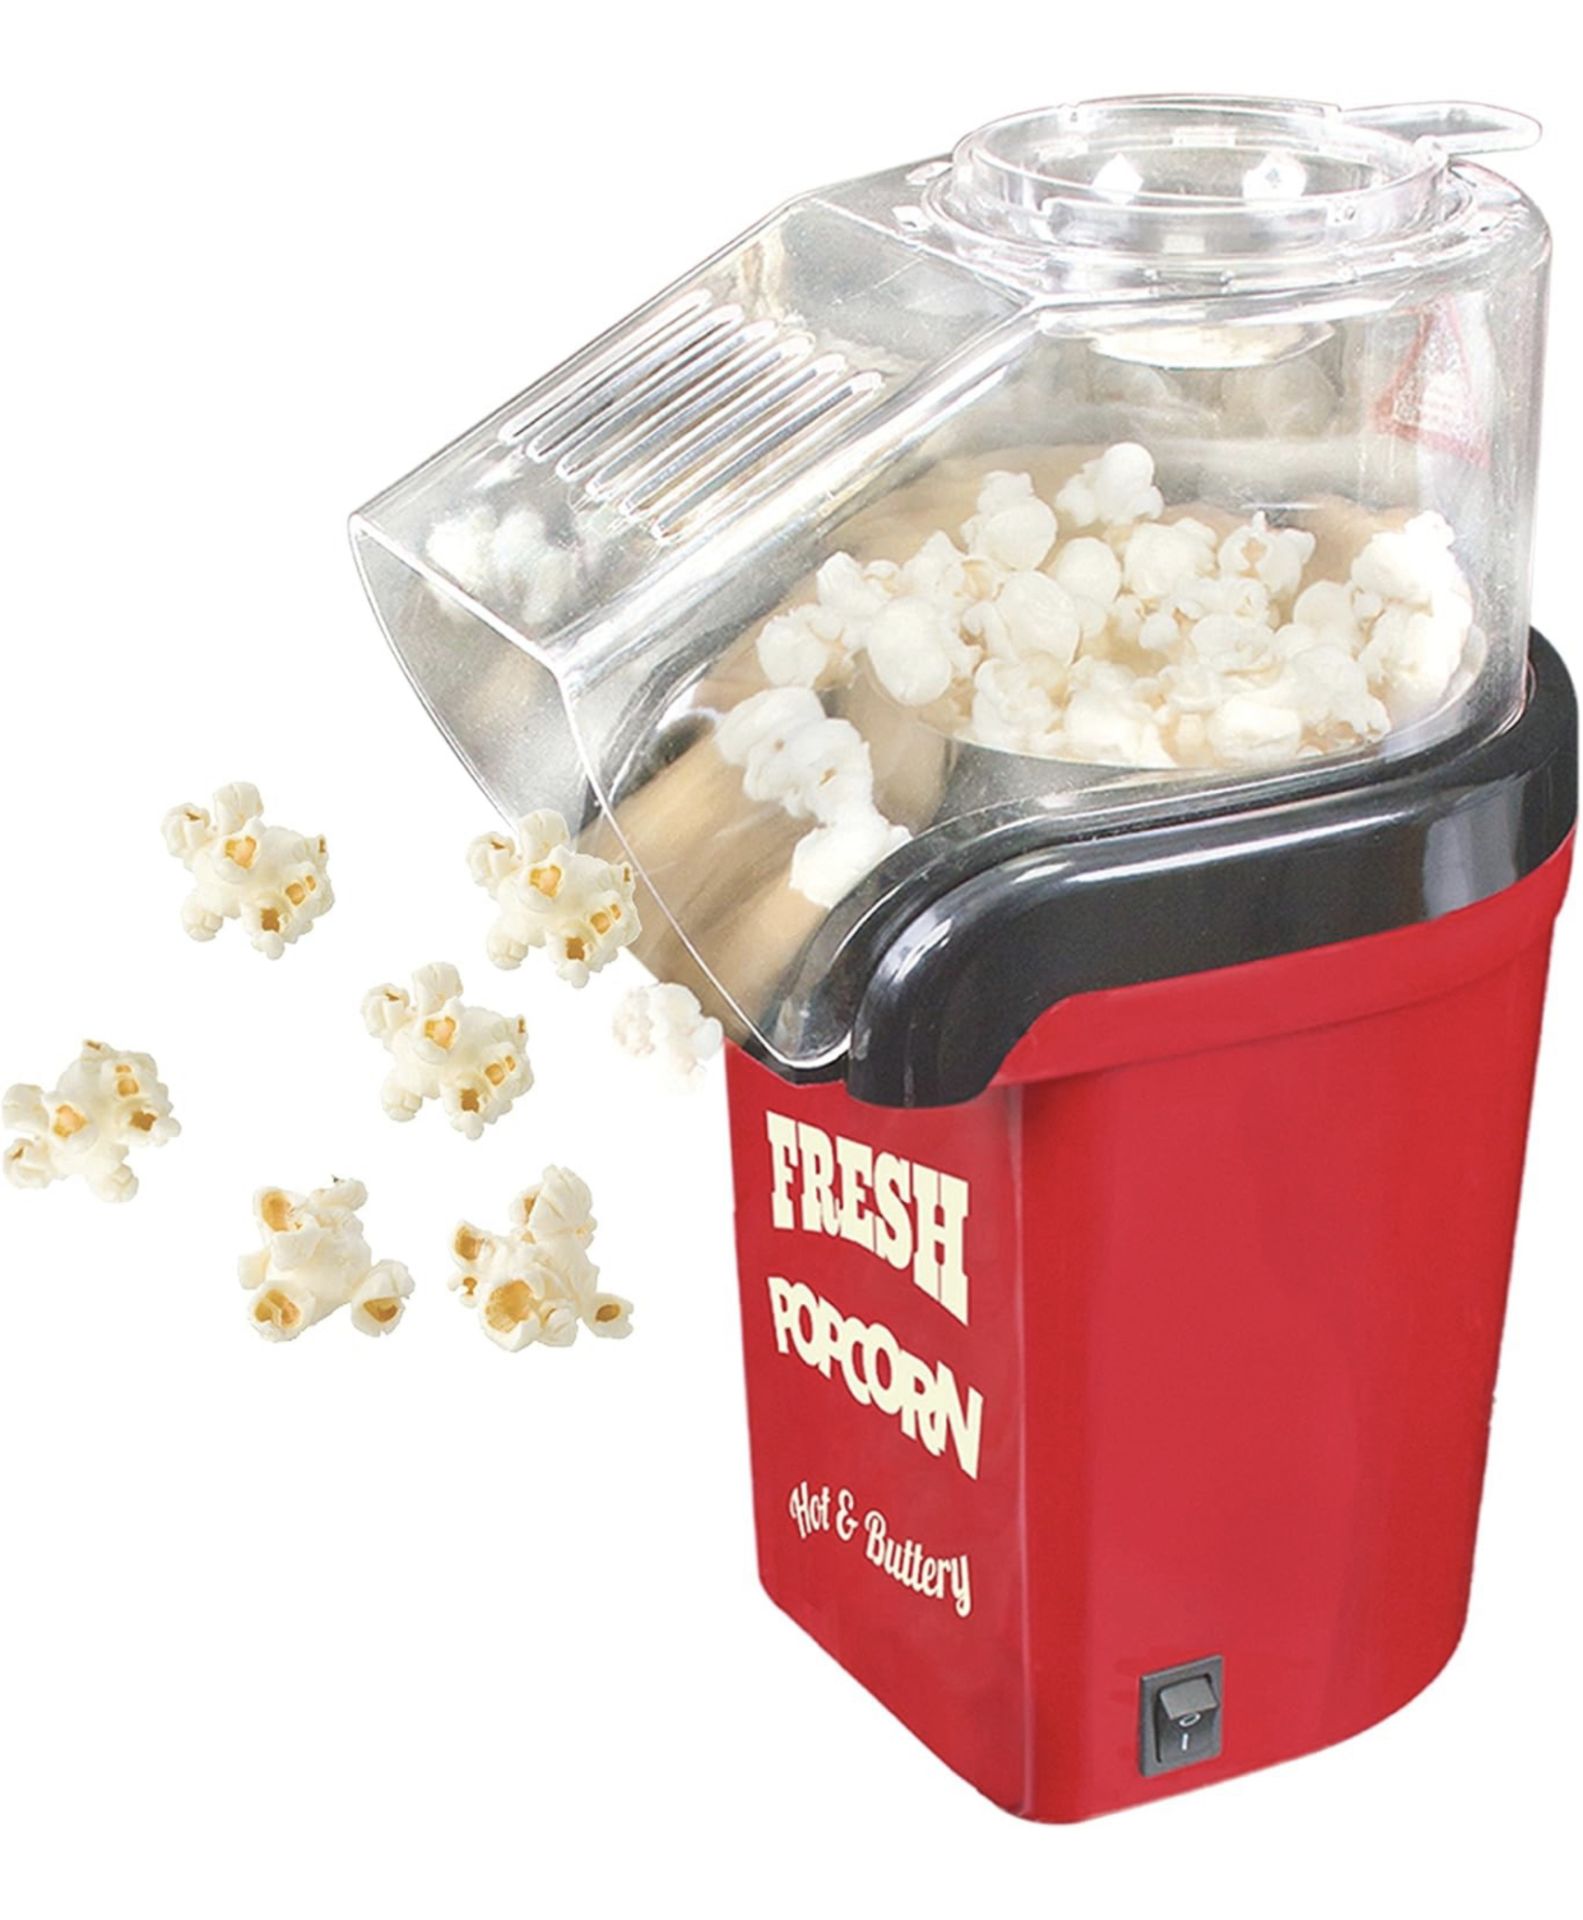 Global Gizmos Fat Free Hot Air Popcorn Maker, Red